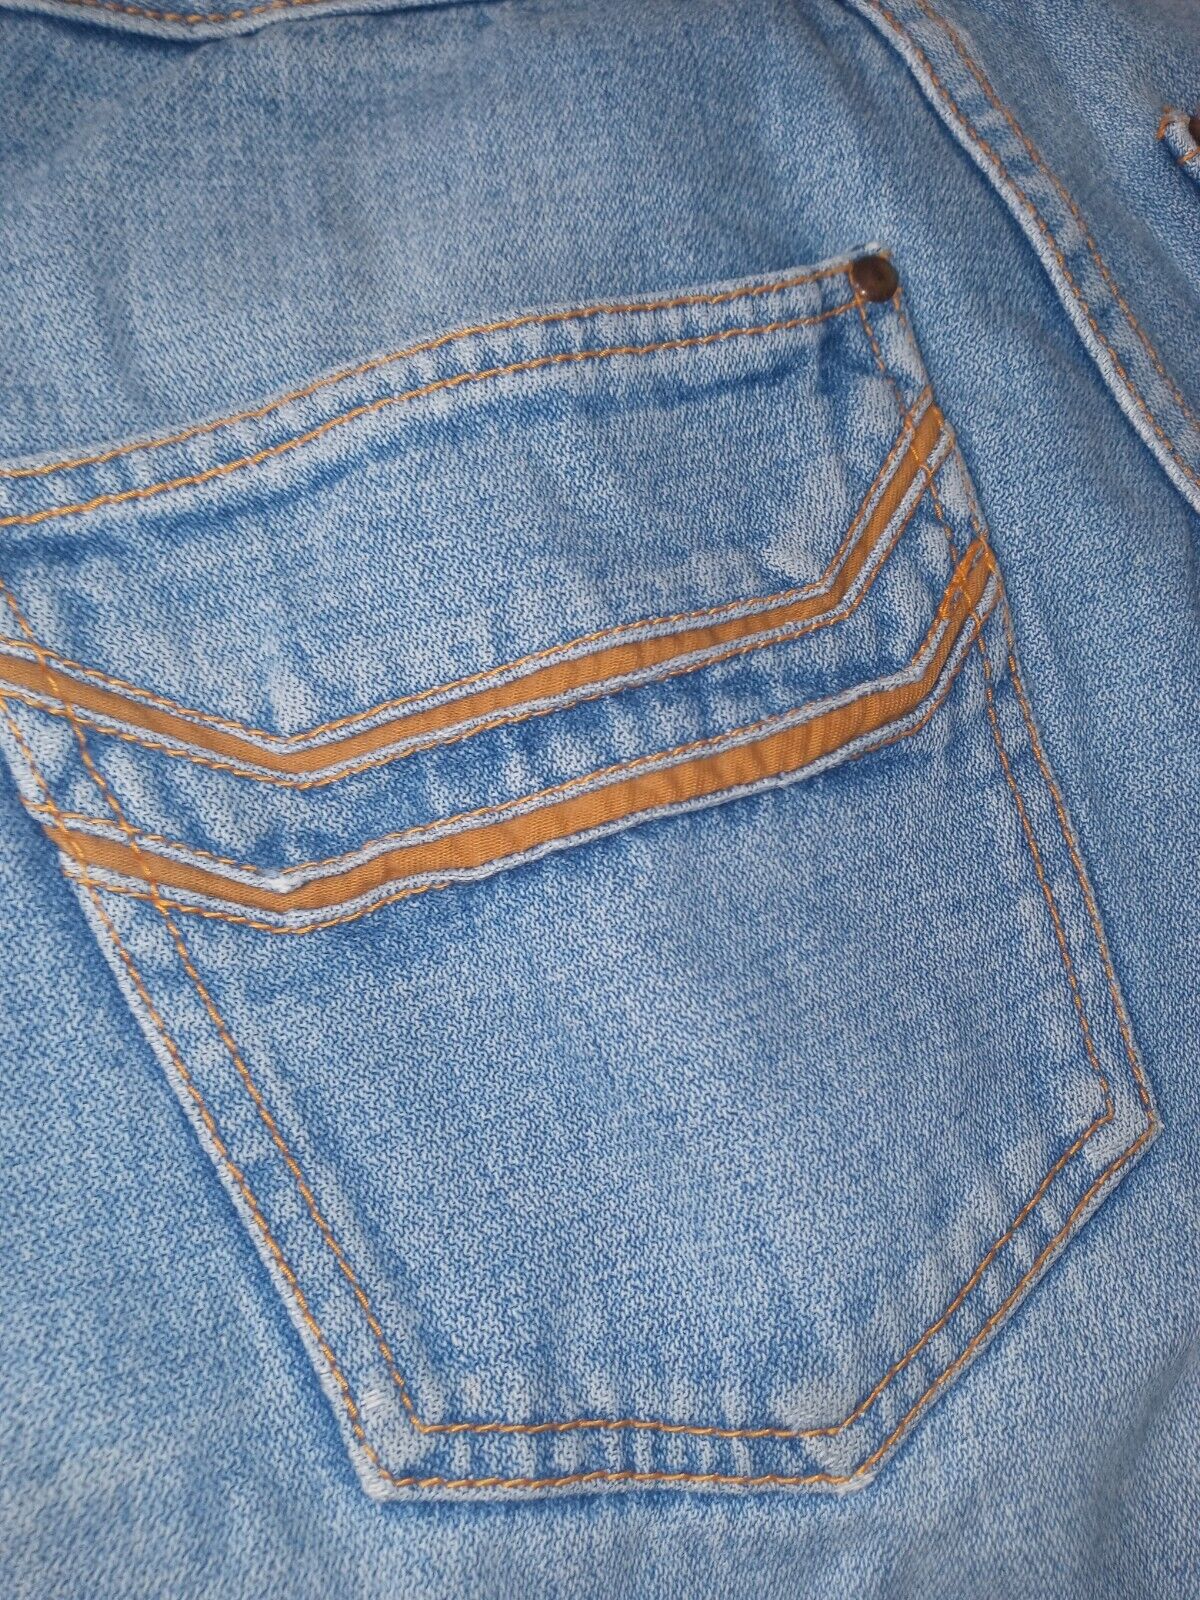 VTG Late 70s-early 80s Brittania Jeans Juniors 9 … - image 10